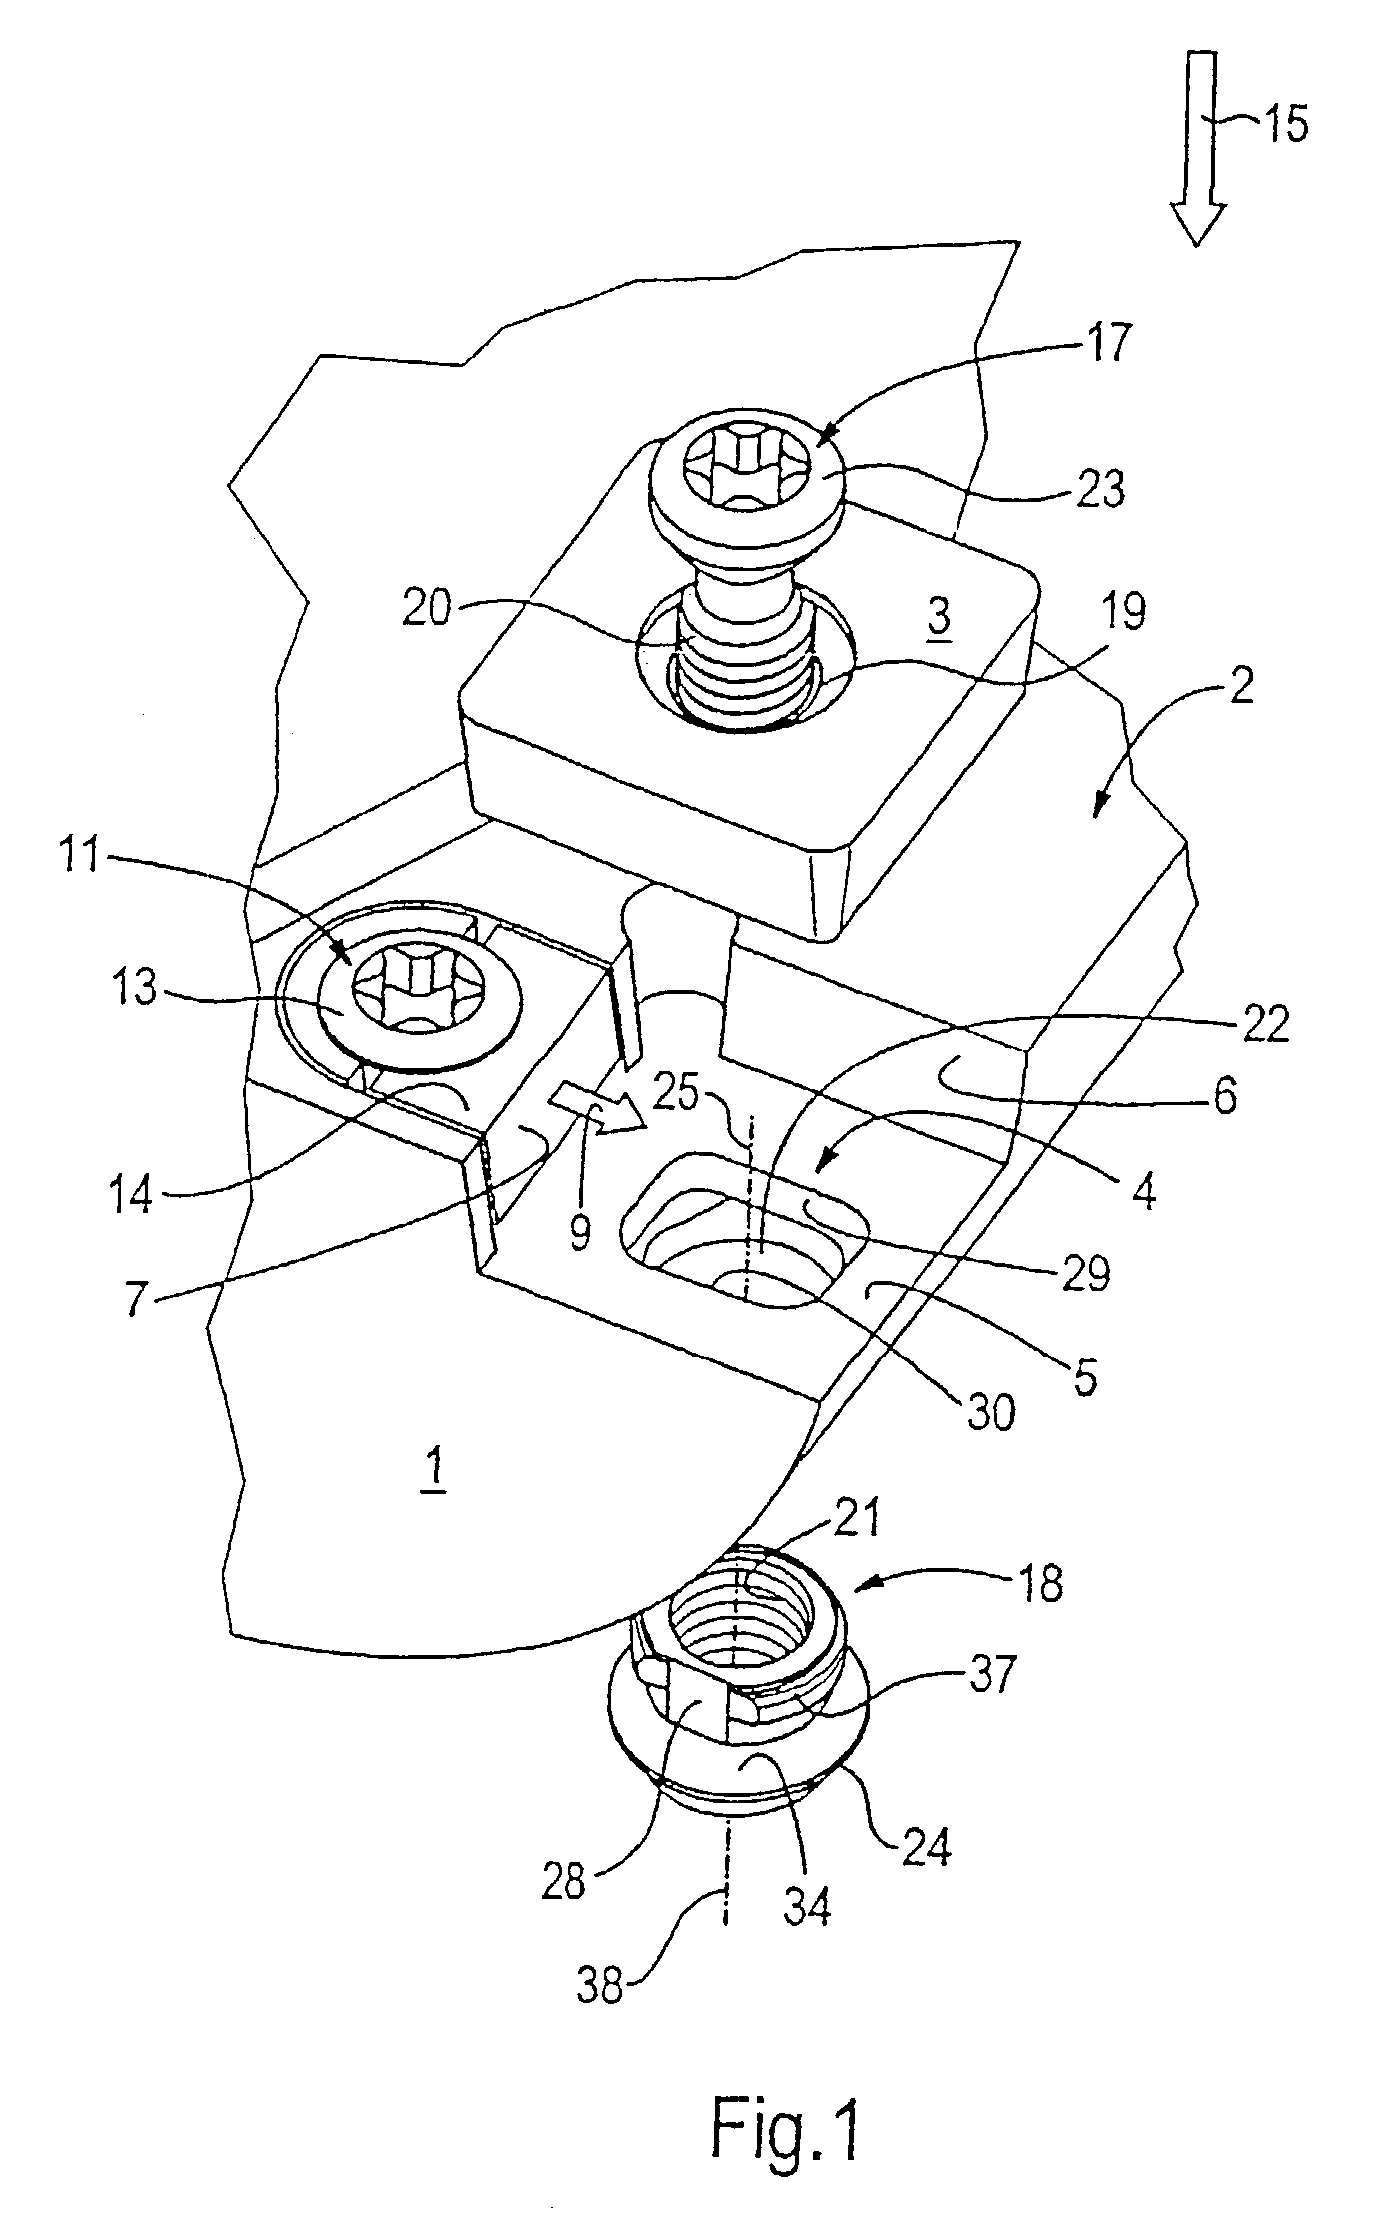 Reamer with clamping arrangement for adjusting cutting insert and other cutting tools with clamping arrangements for adjusting cutting inserts